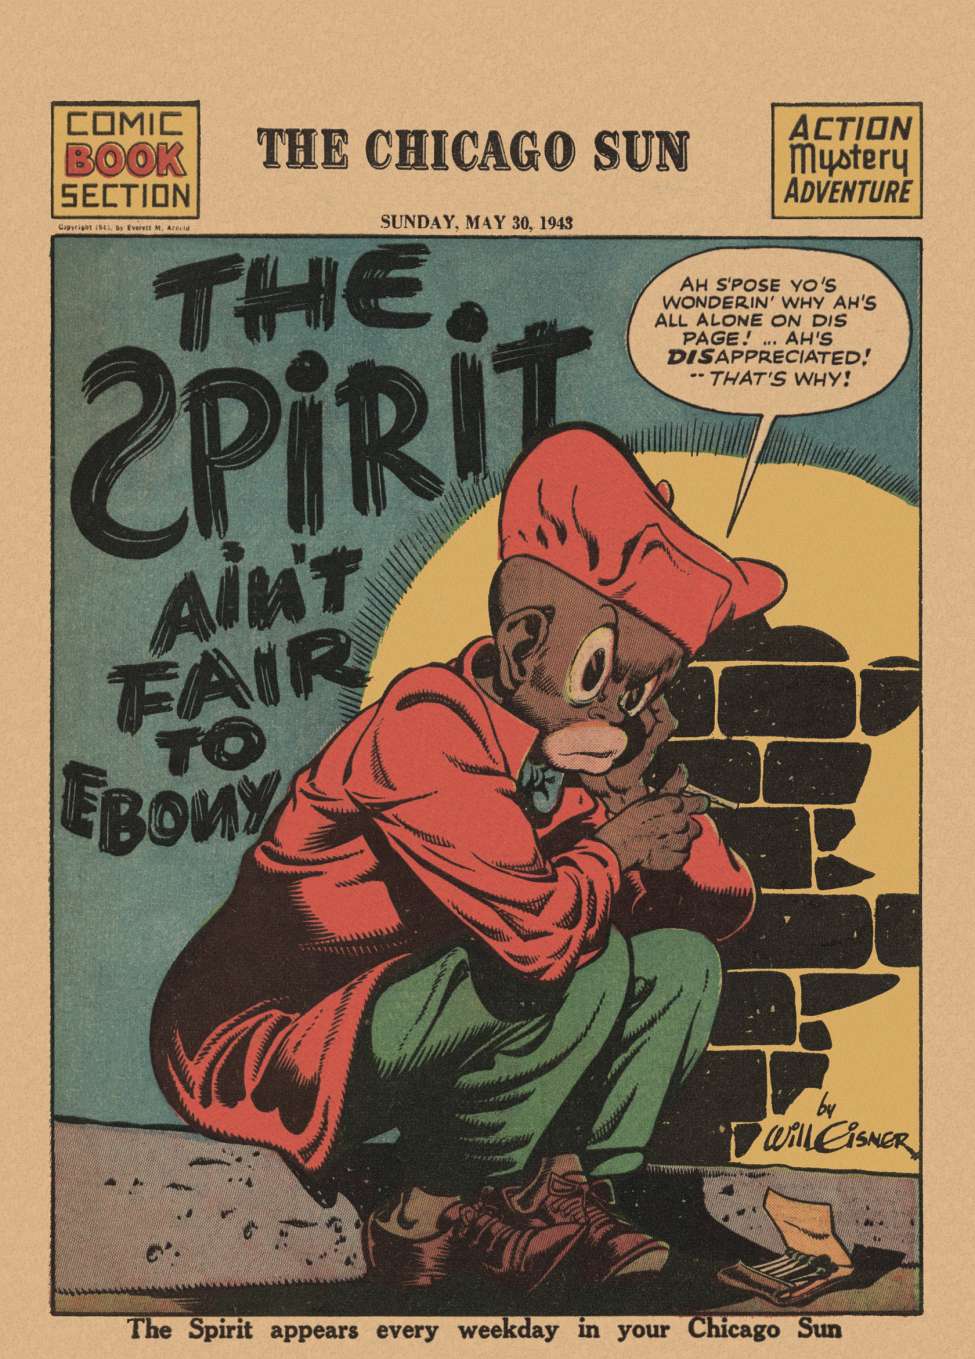 Book Cover For The Spirit (1943-05-30) - Chicago Sun - Version 1